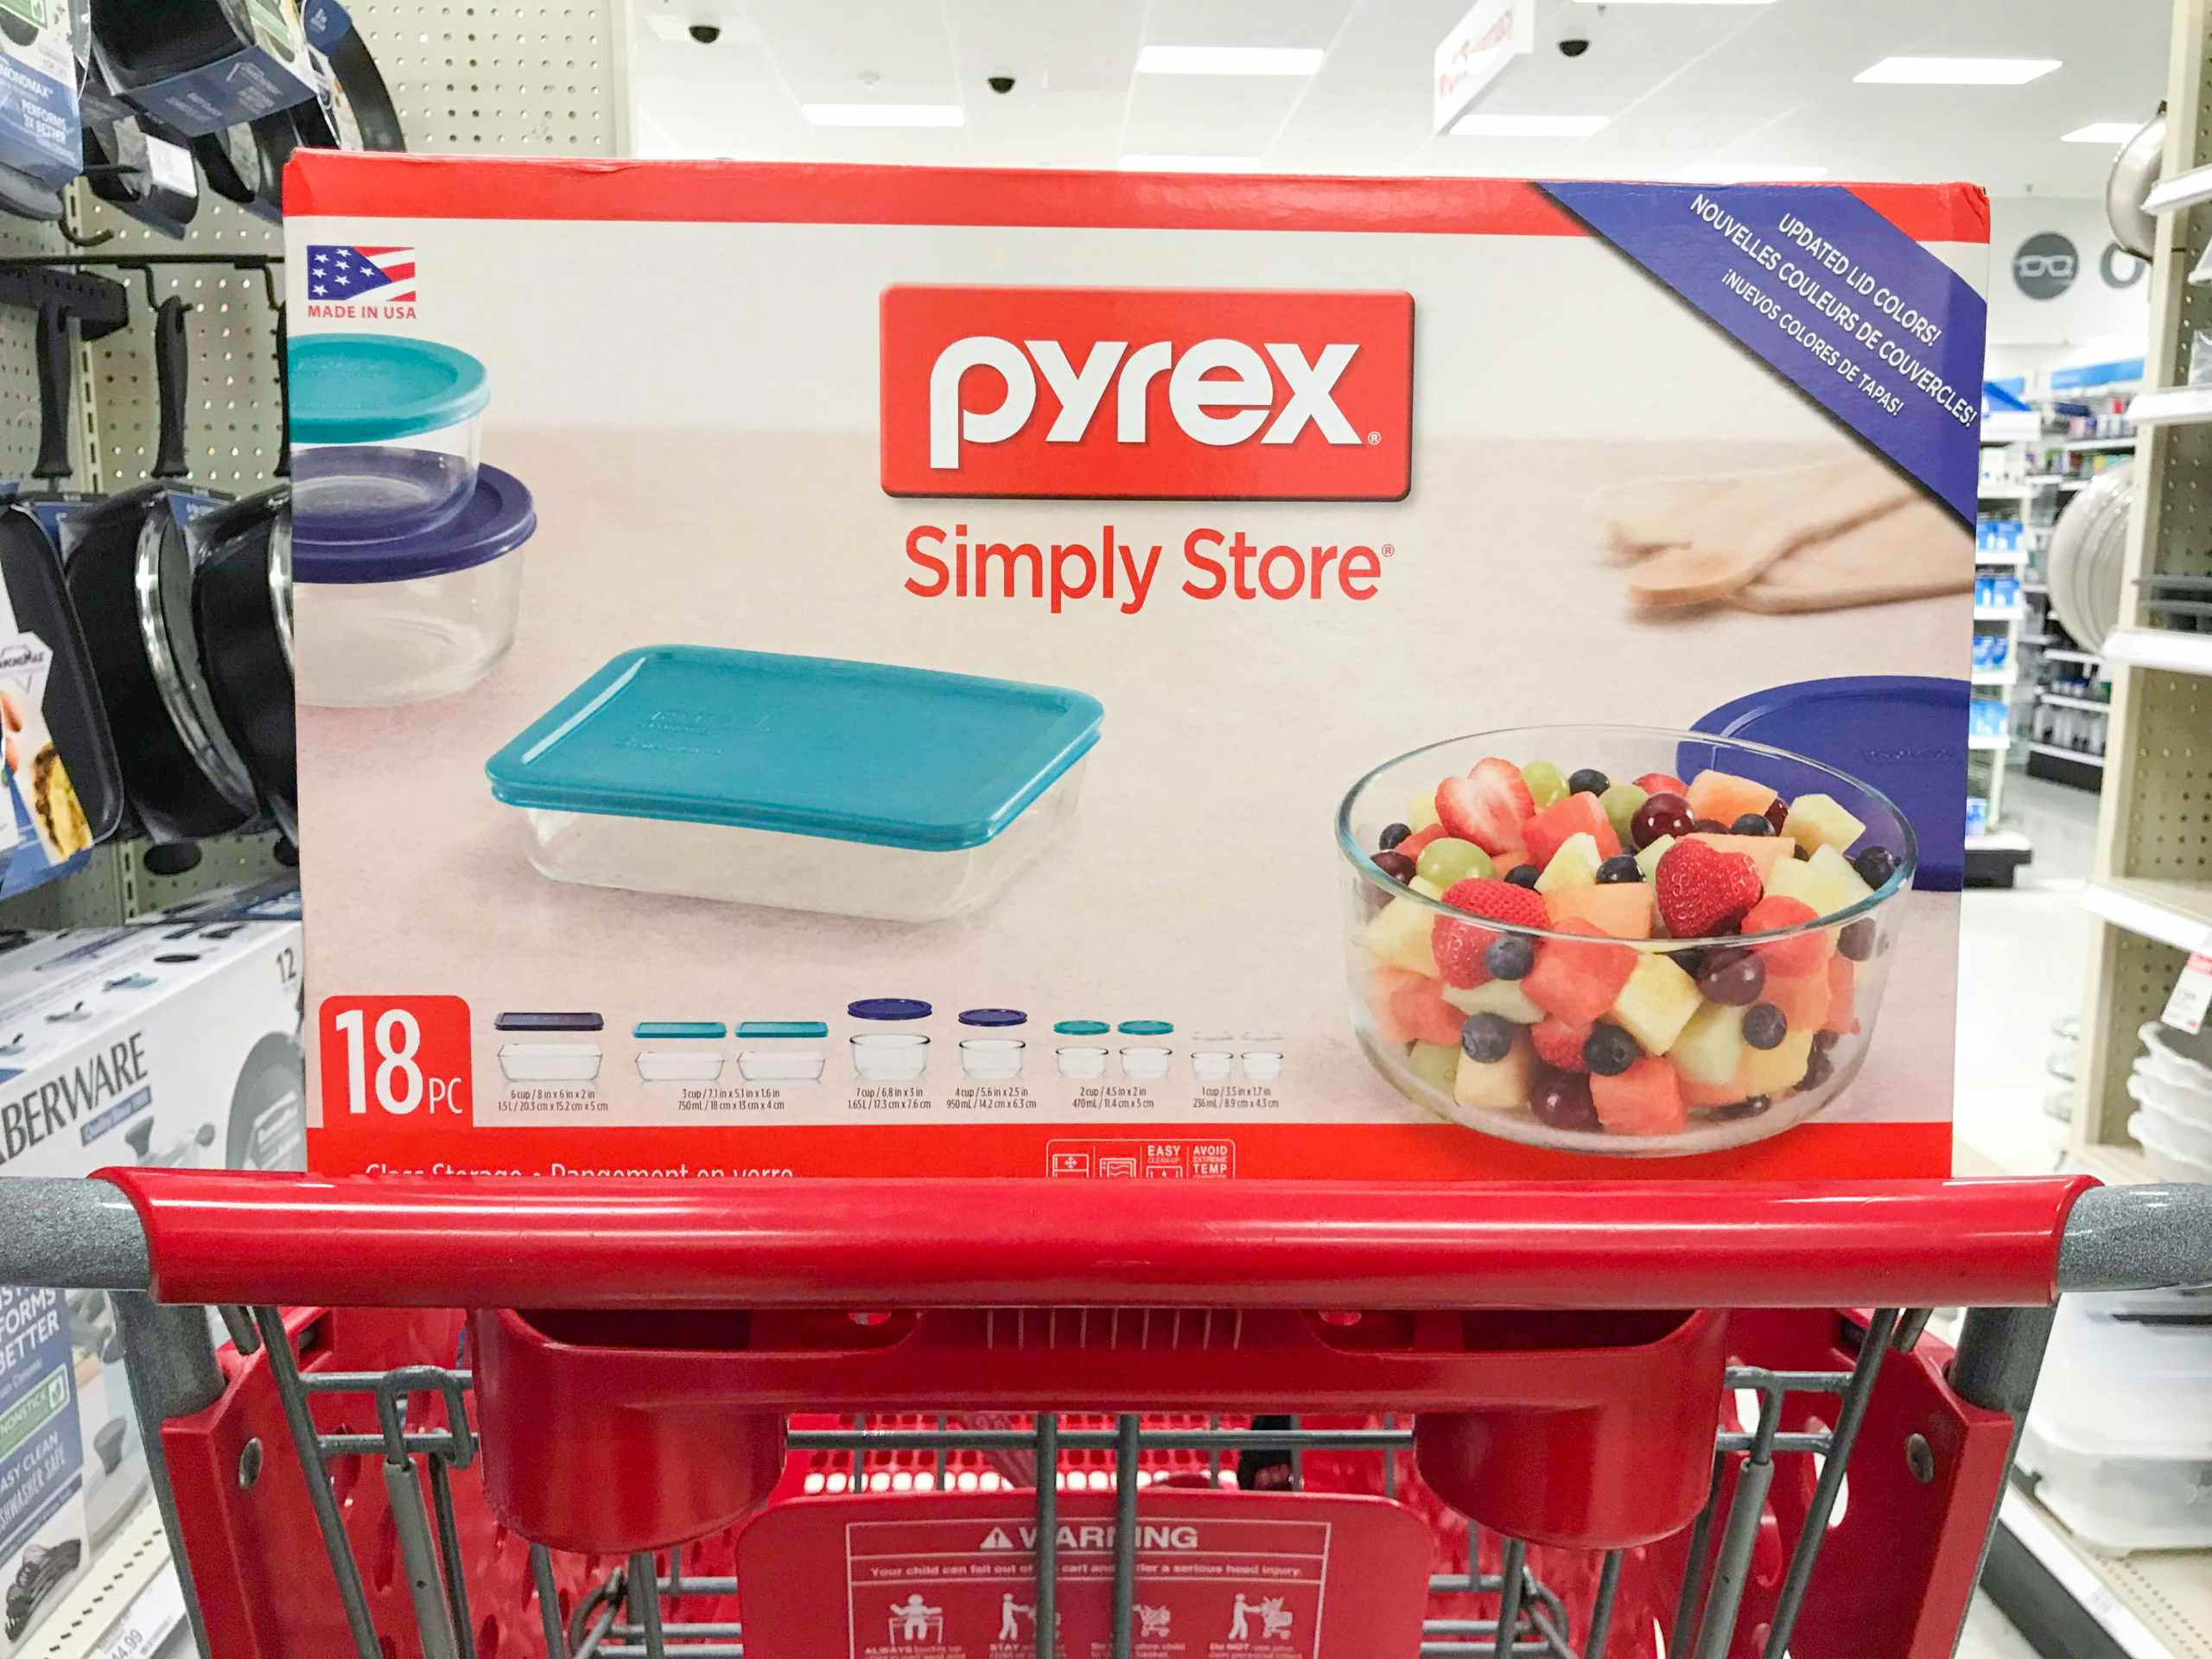 18-piece Pyrex set in box on store shopping cart